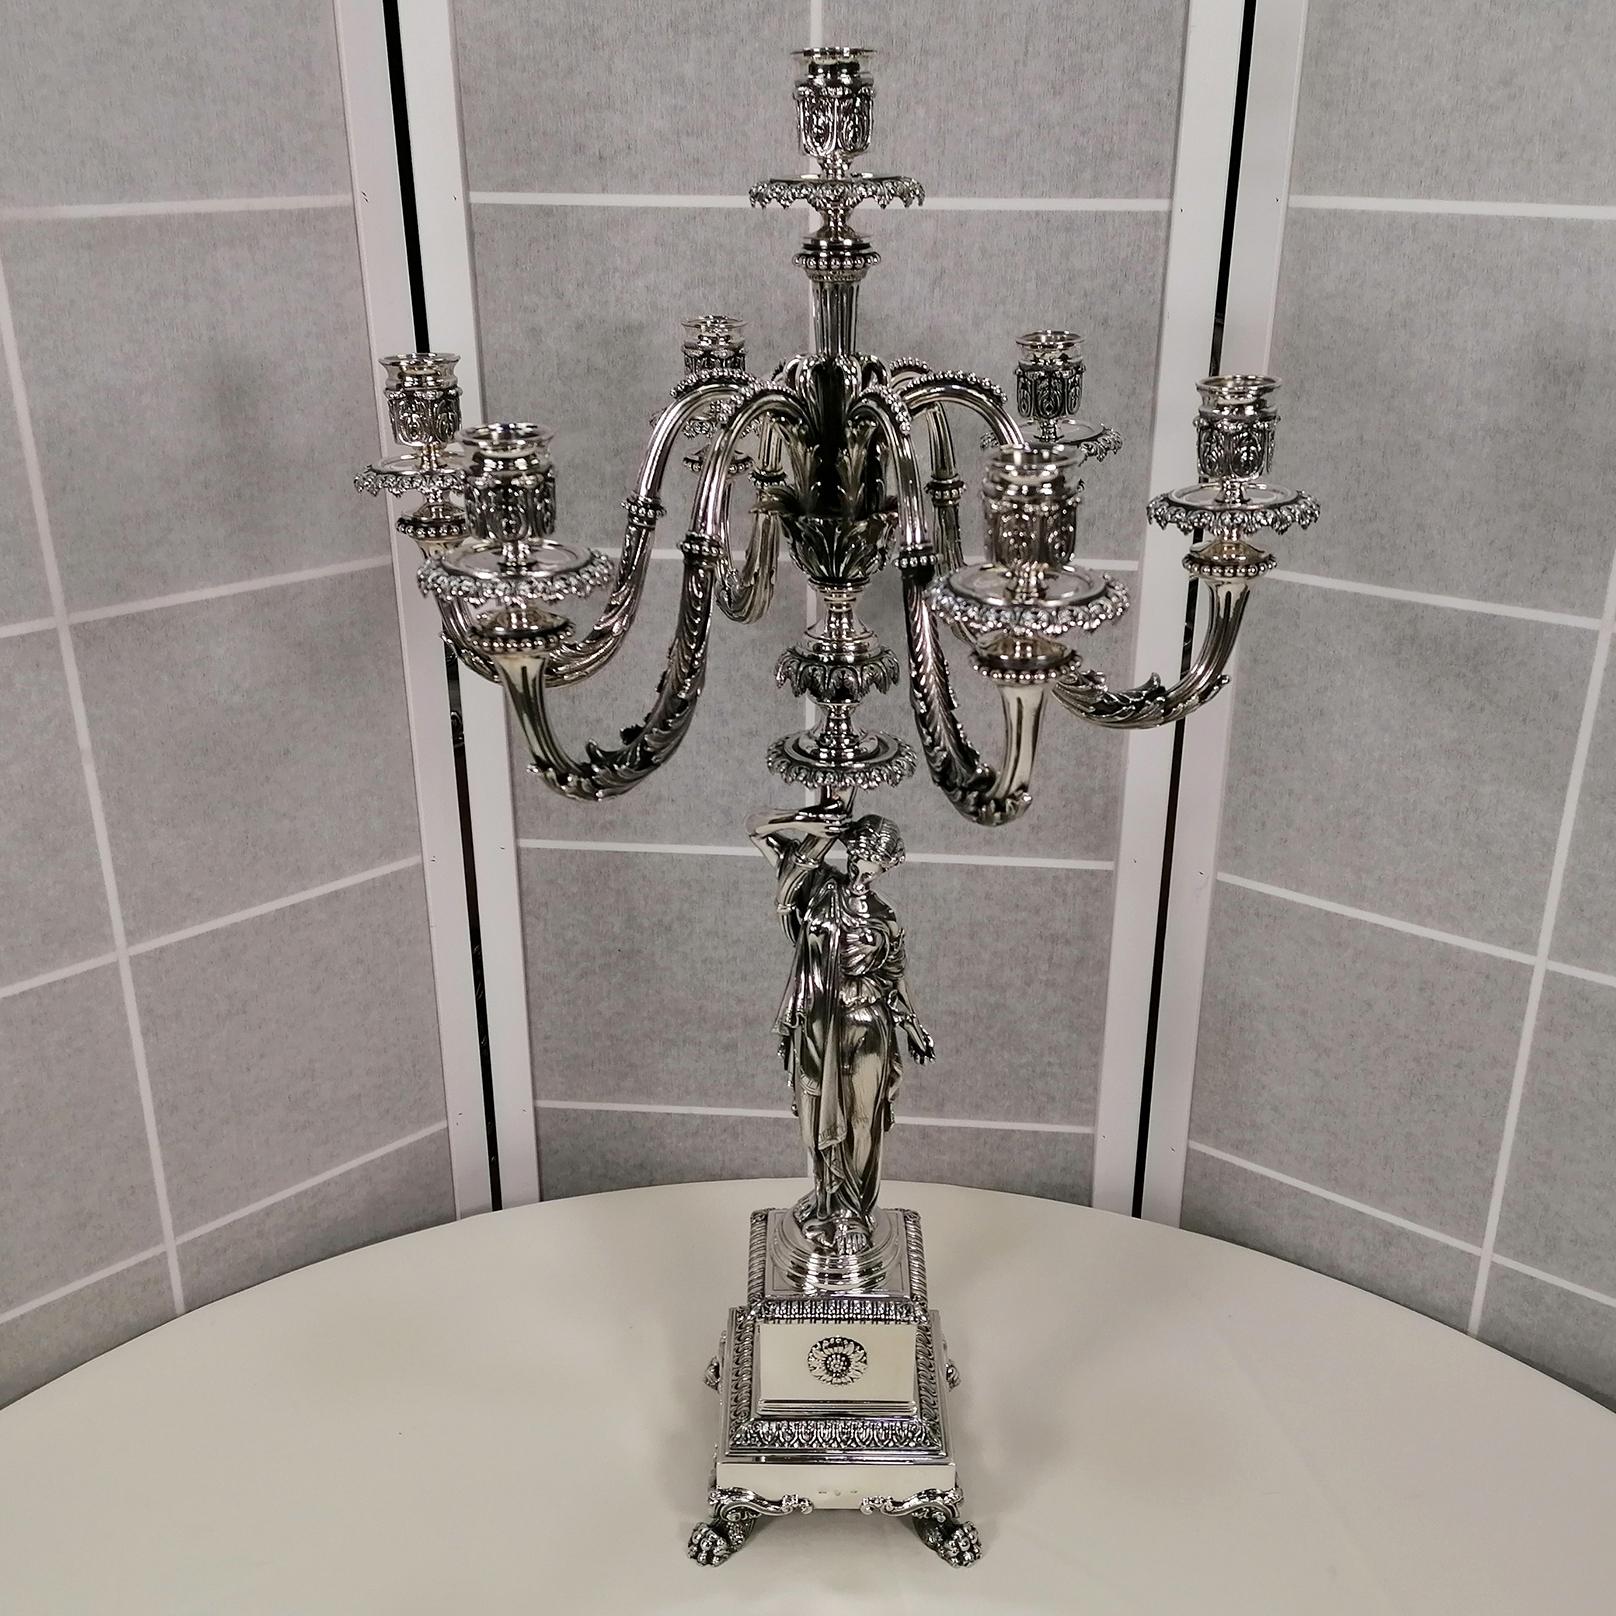 Magnificent Empire style candelabra in solid 800 silver
The base is square with lion paw-shaped feet.
Two frames with the typical palmettes of the Empire style frame a second smaller square decorated with 4 central flowers. The stem of the